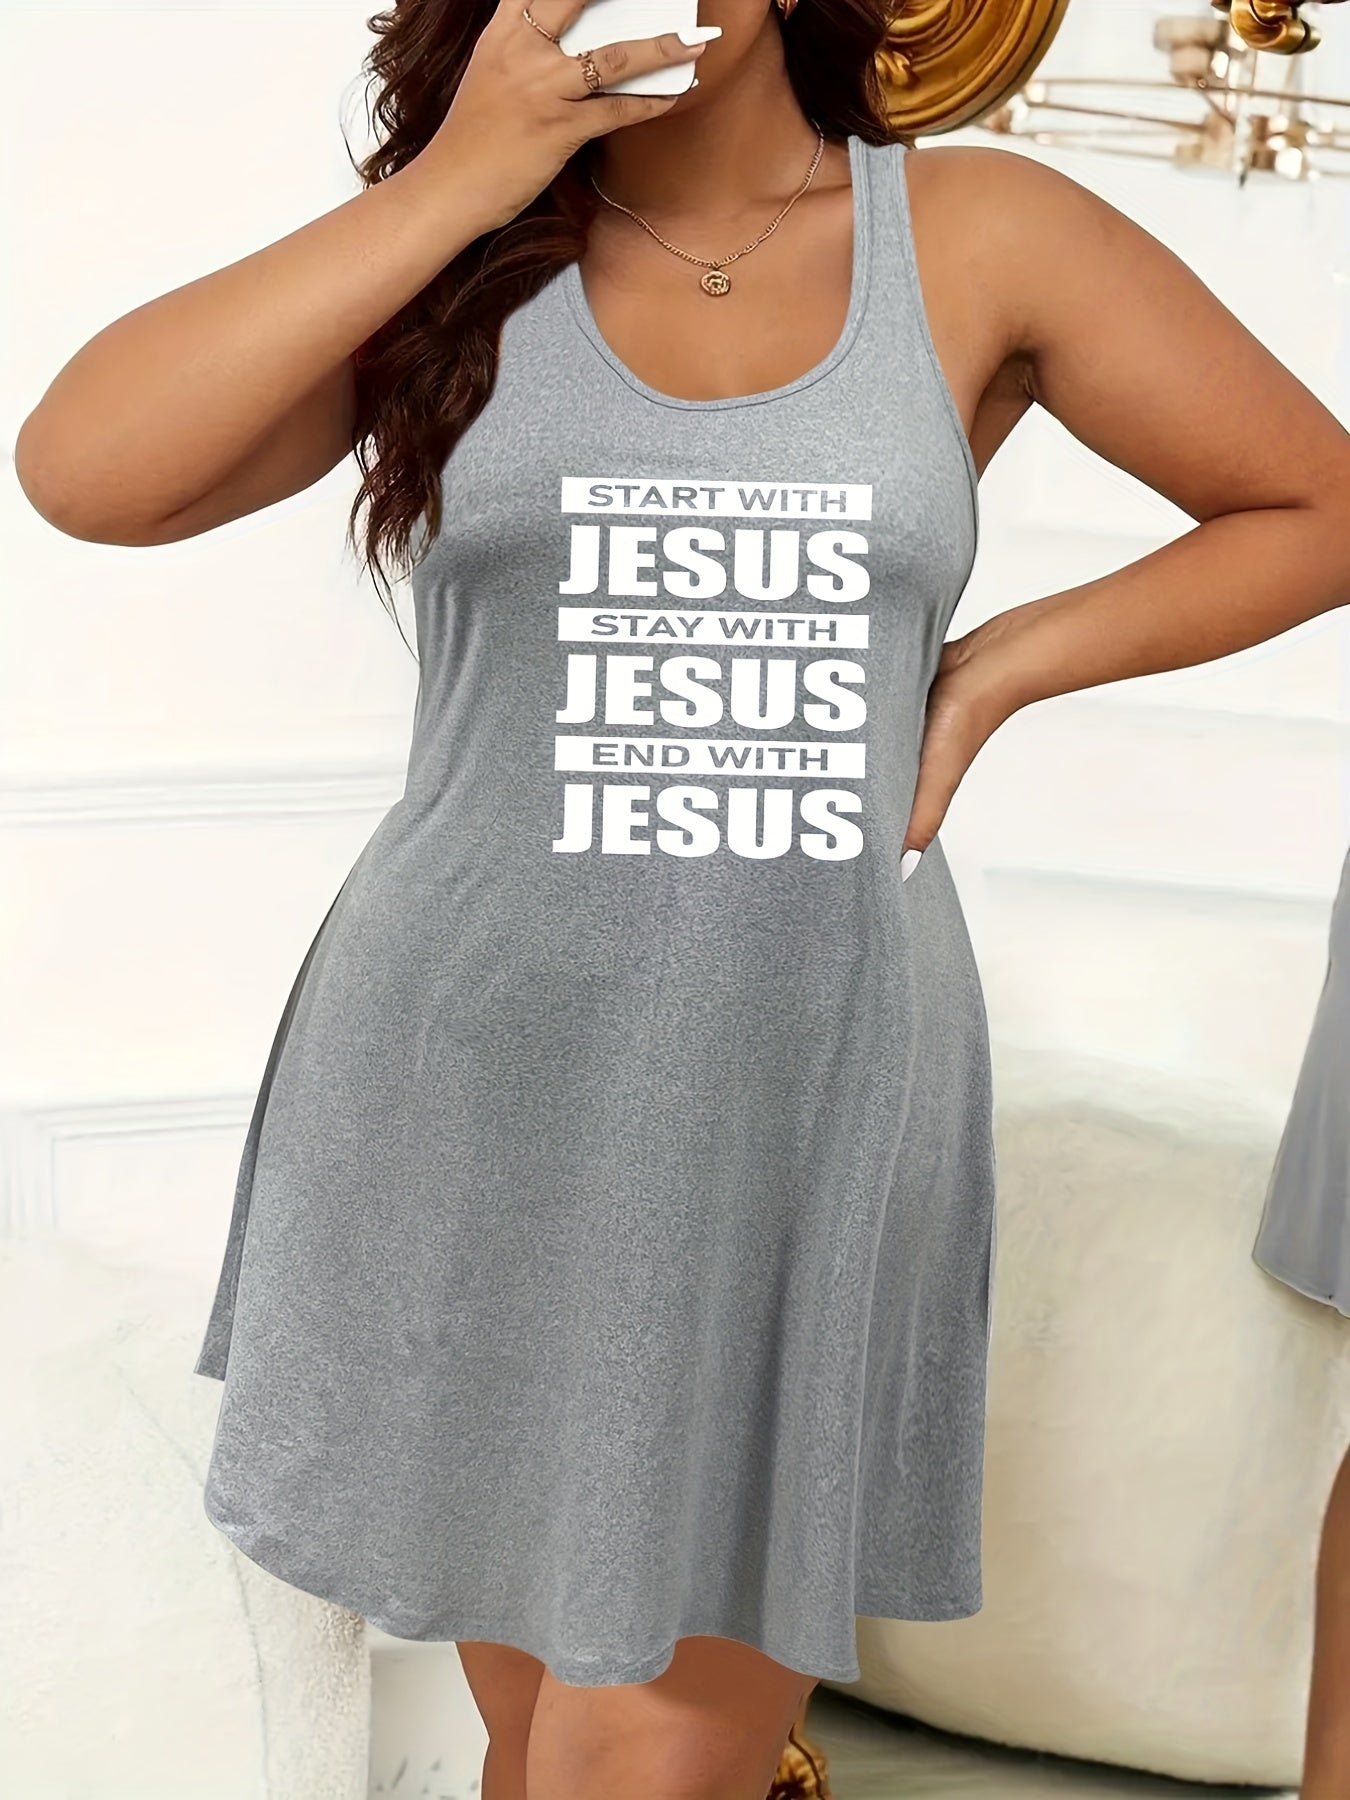 Start With, Stay With, End With Jesus Plus Size Women's Christian Pajamas claimedbygoddesigns